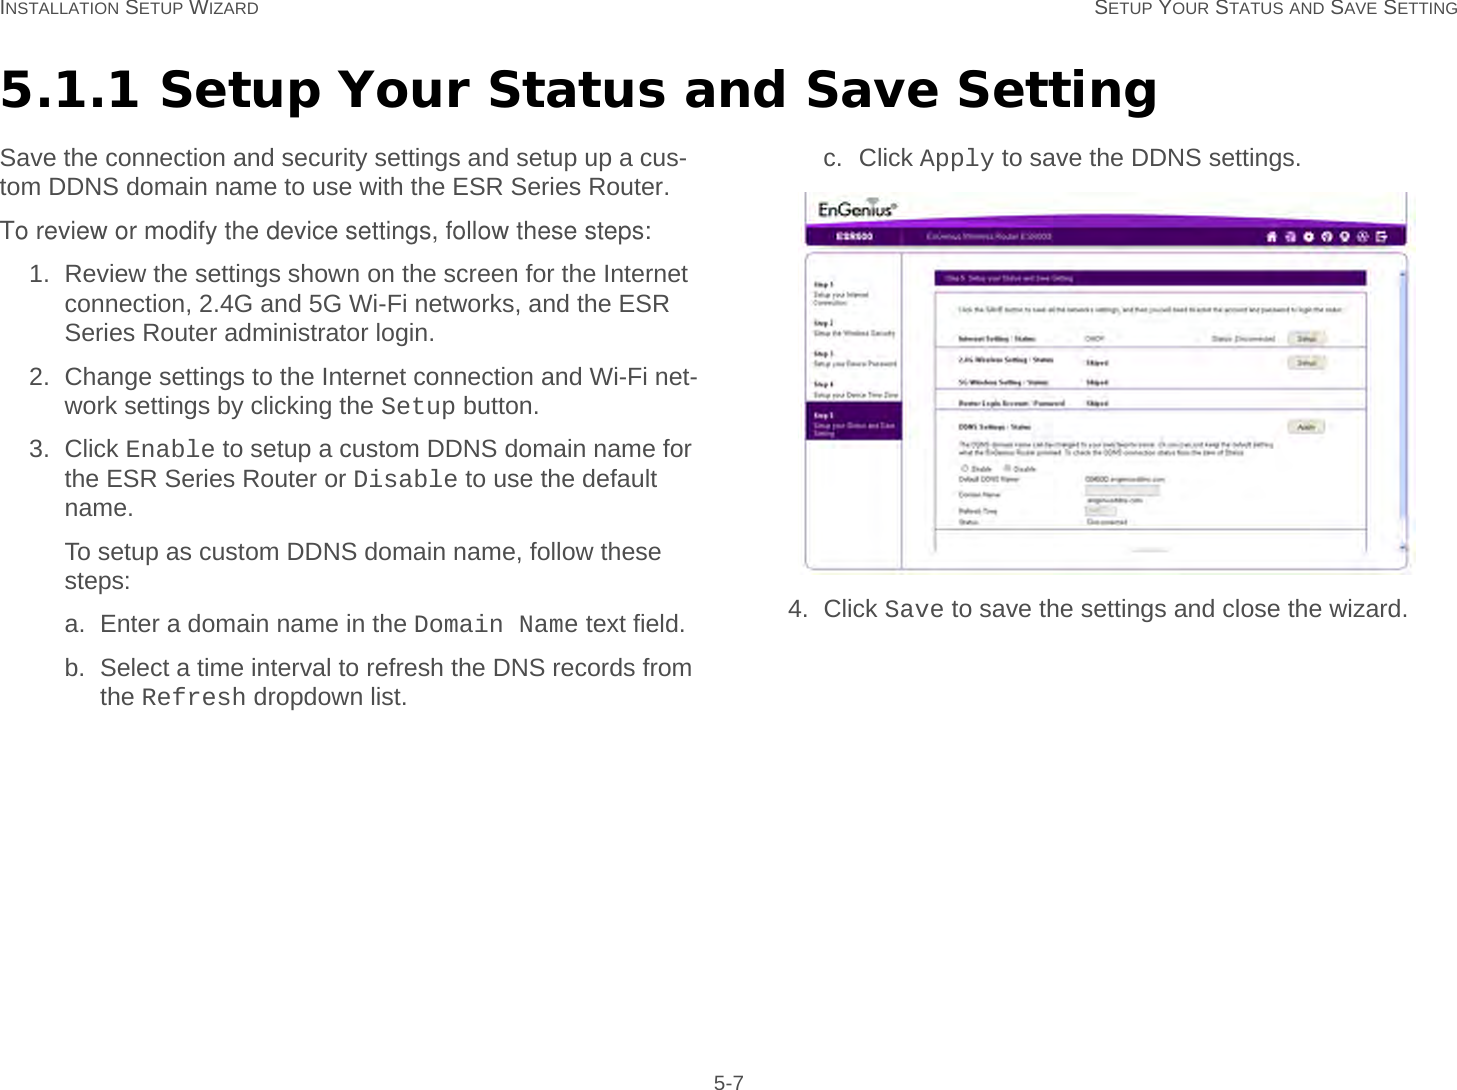 INSTALLATION SETUP WIZARD SETUP YOUR STATUS AND SAVE SETTING 5-75.1.1 Setup Your Status and Save SettingSave the connection and security settings and setup up a cus-tom DDNS domain name to use with the ESR Series Router.To review or modify the device settings, follow these steps:1. Review the settings shown on the screen for the Internet connection, 2.4G and 5G Wi-Fi networks, and the ESR Series Router administrator login.2. Change settings to the Internet connection and Wi-Fi net-work settings by clicking the Setup button.3. Click Enable to setup a custom DDNS domain name for the ESR Series Router or Disable to use the default name.To setup as custom DDNS domain name, follow these steps:a. Enter a domain name in the Domain Name text field.b. Select a time interval to refresh the DNS records from the Refresh dropdown list.c. Click Apply to save the DDNS settings.4. Click Save to save the settings and close the wizard.